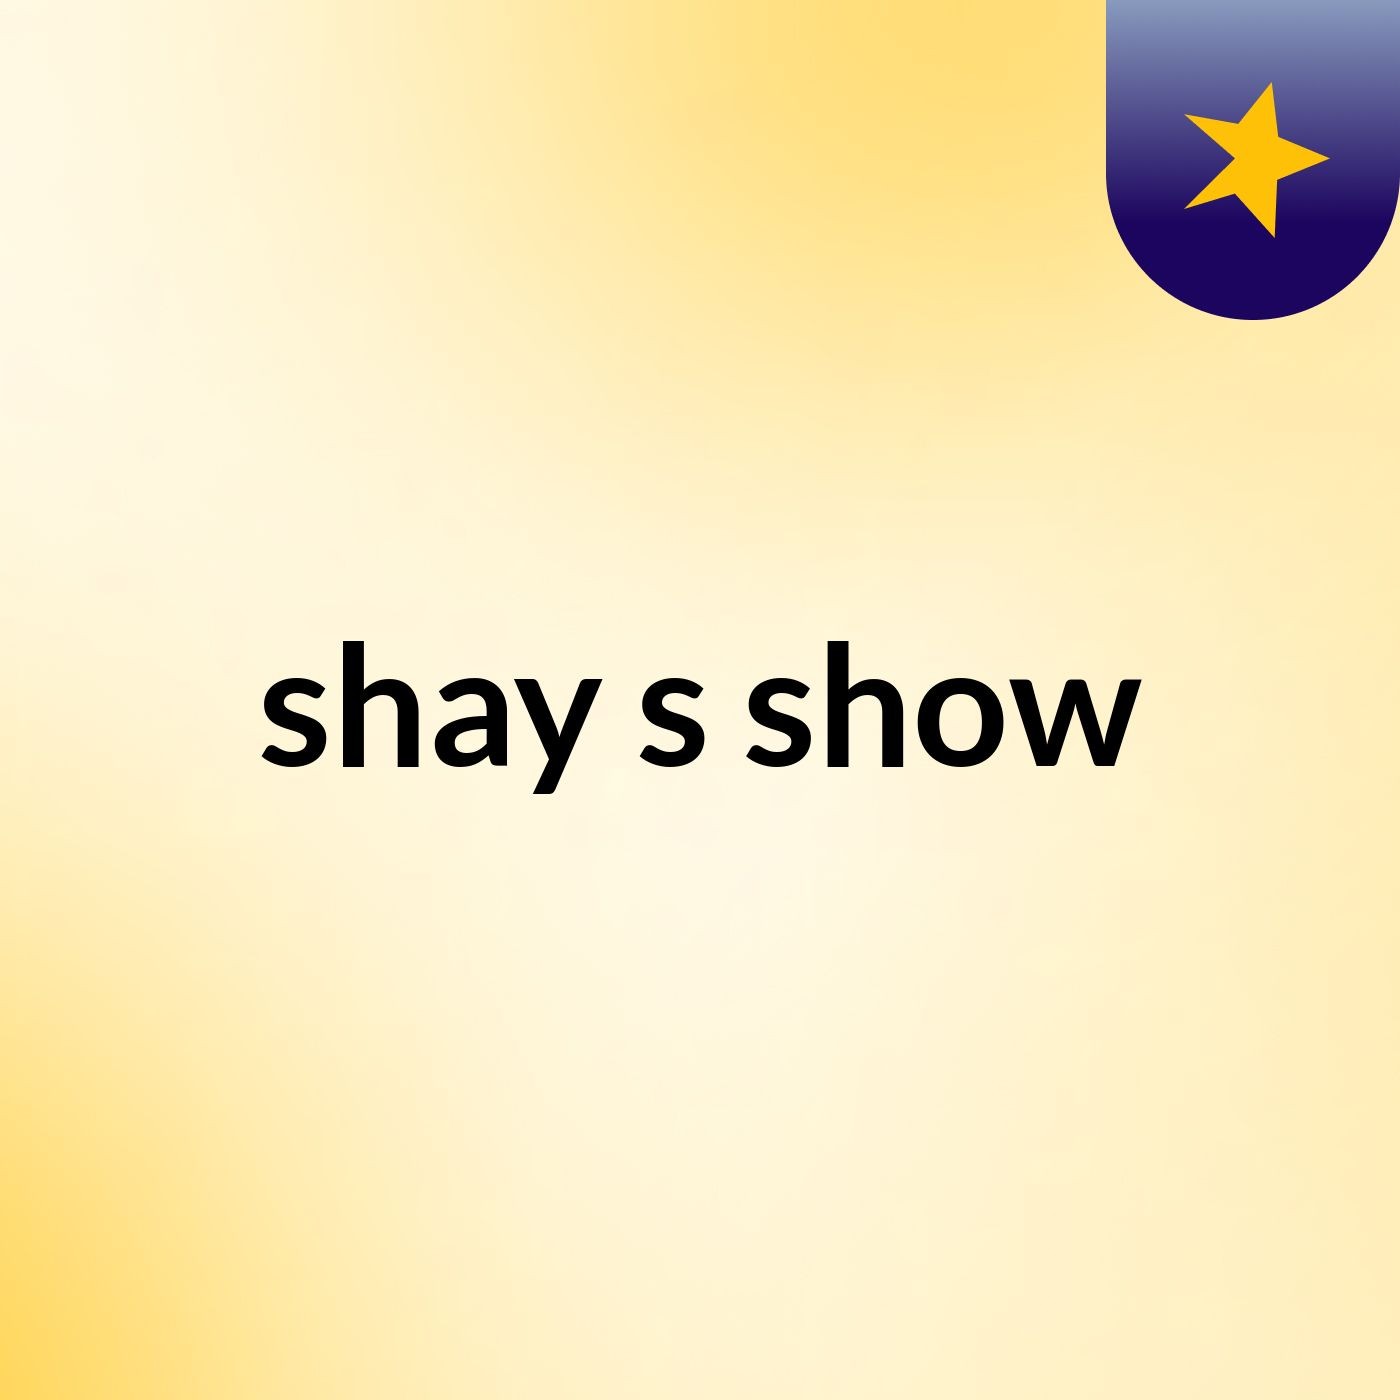 Episode 3 - shay's show